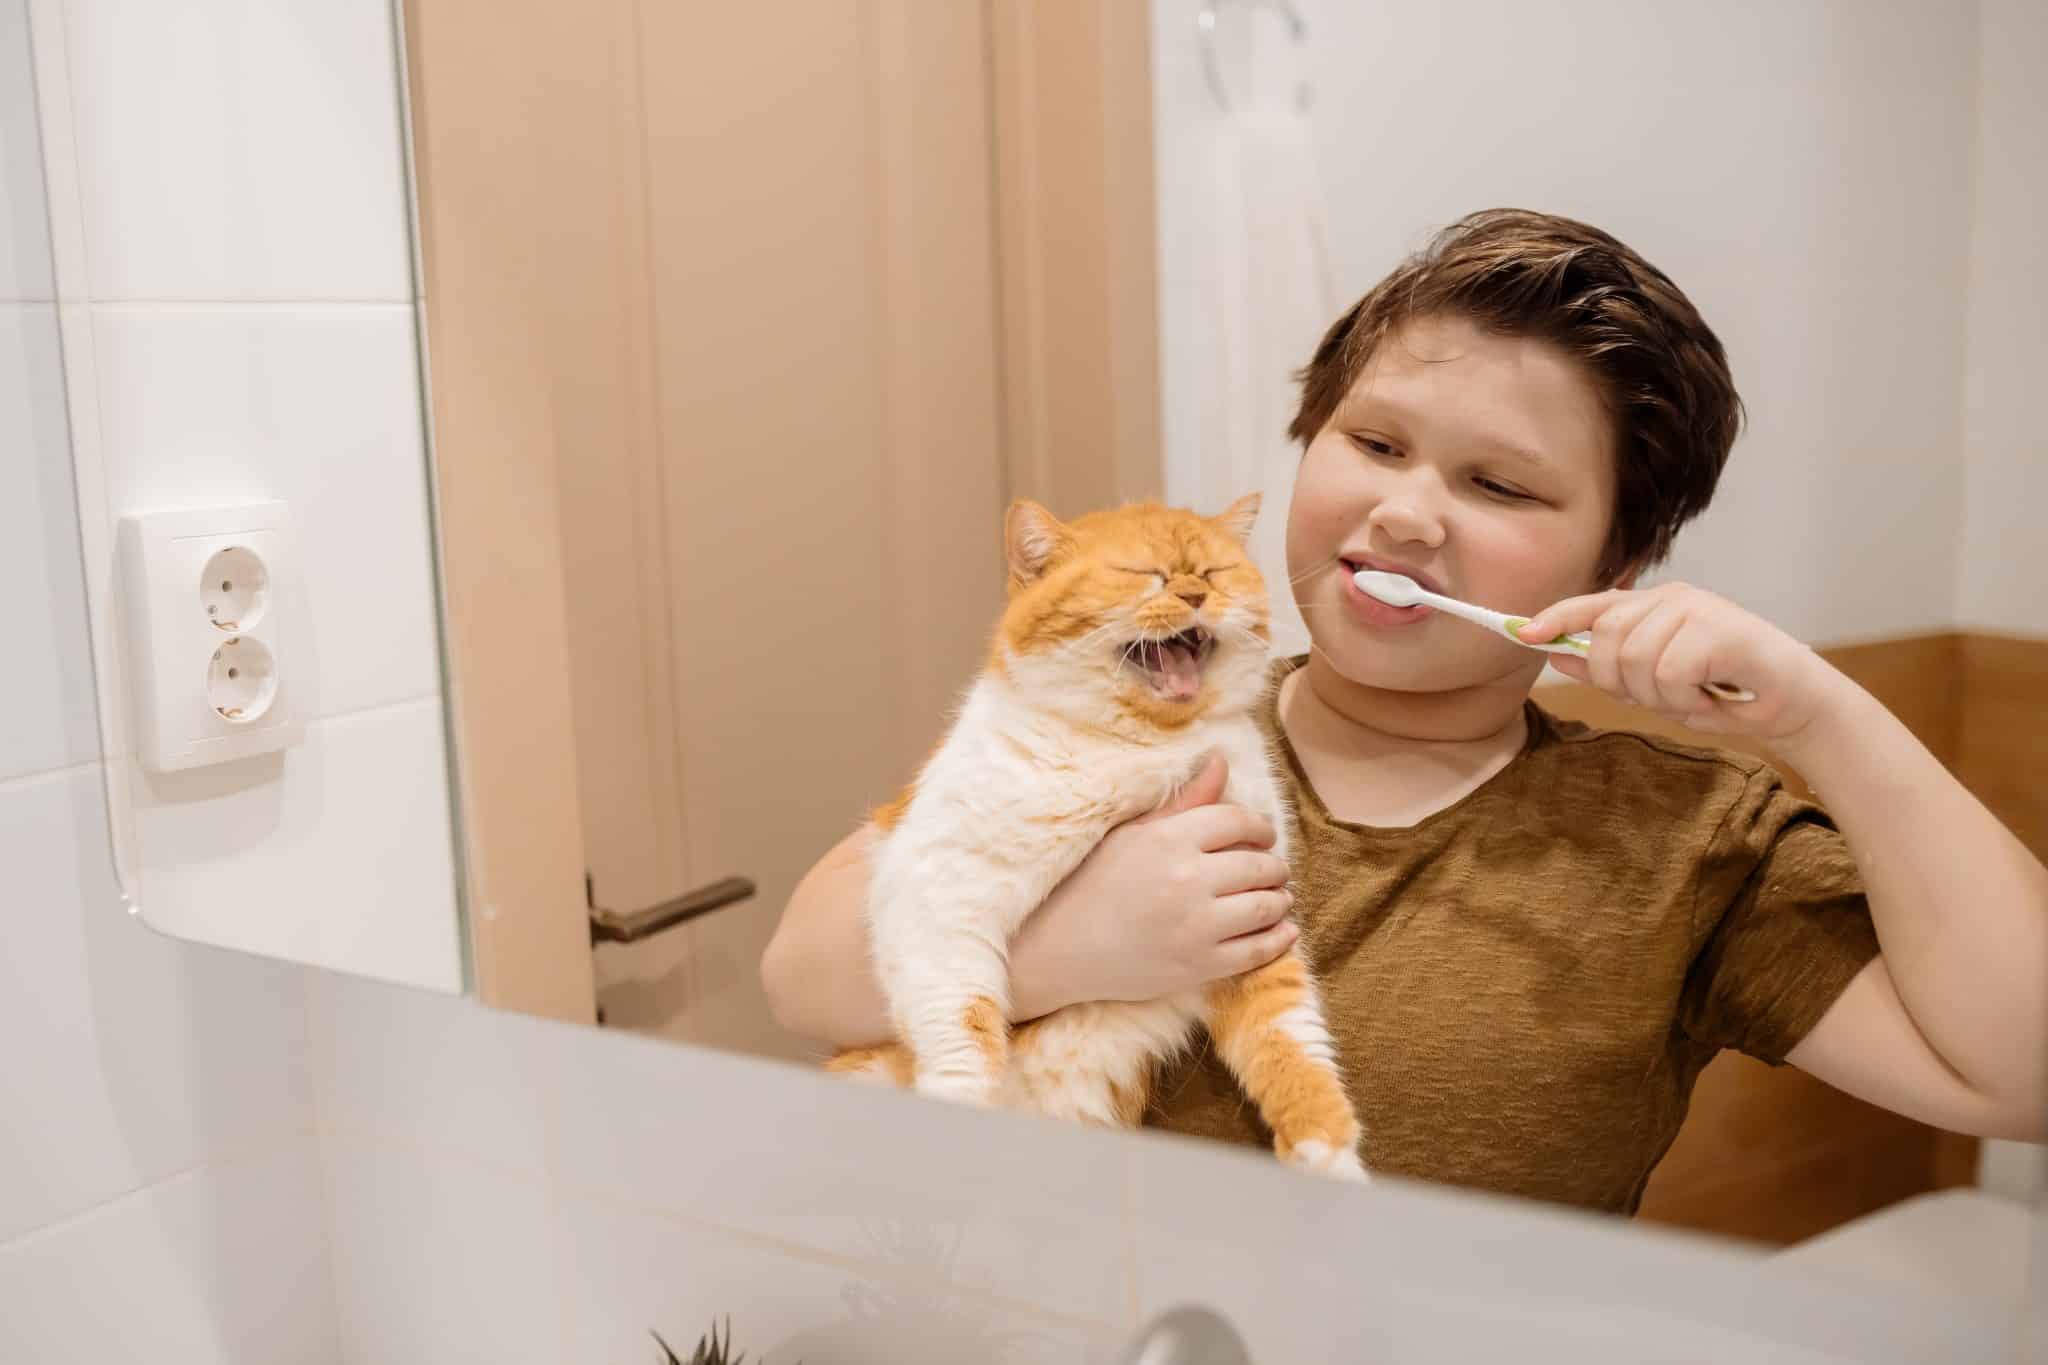 child brushing his teeth while holding their pet cat